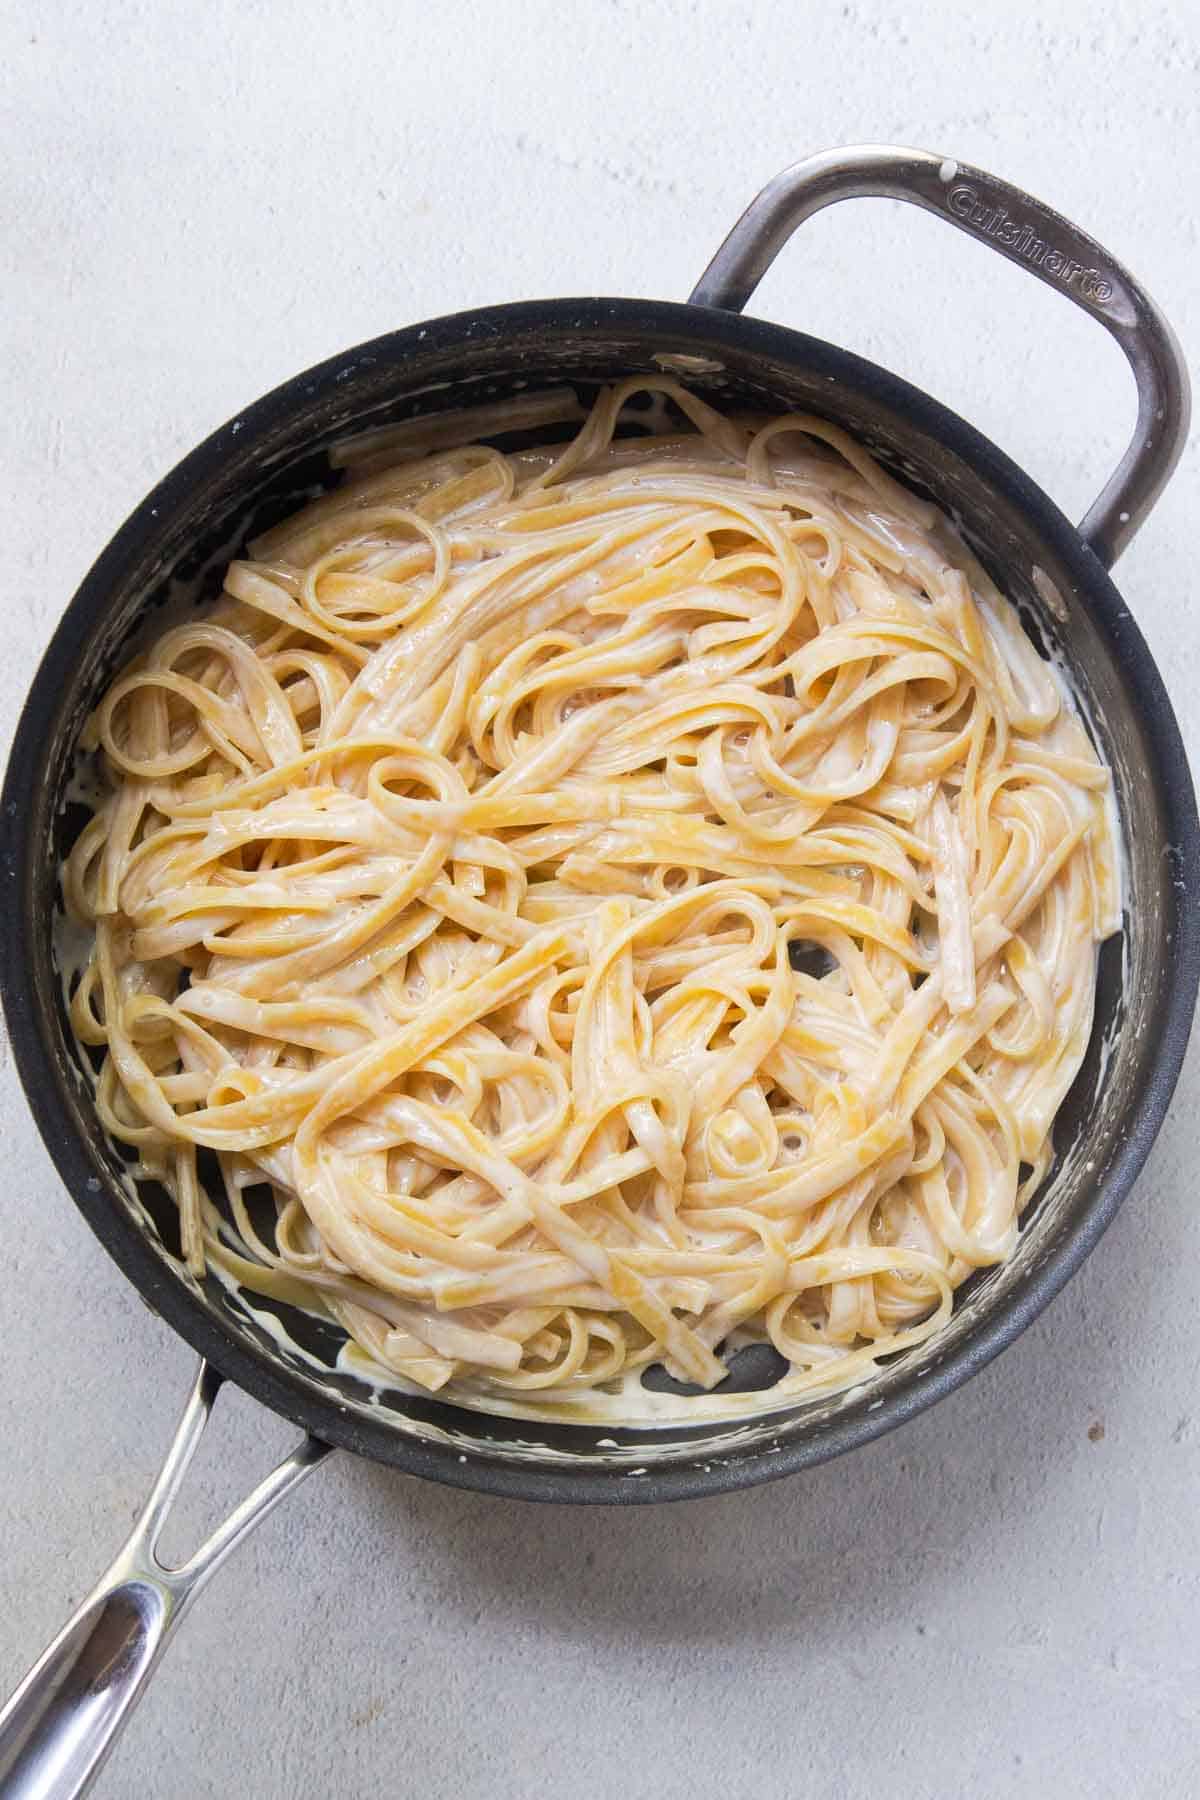 The pasta is cooked until al dente and most of the liquid has been absorbed